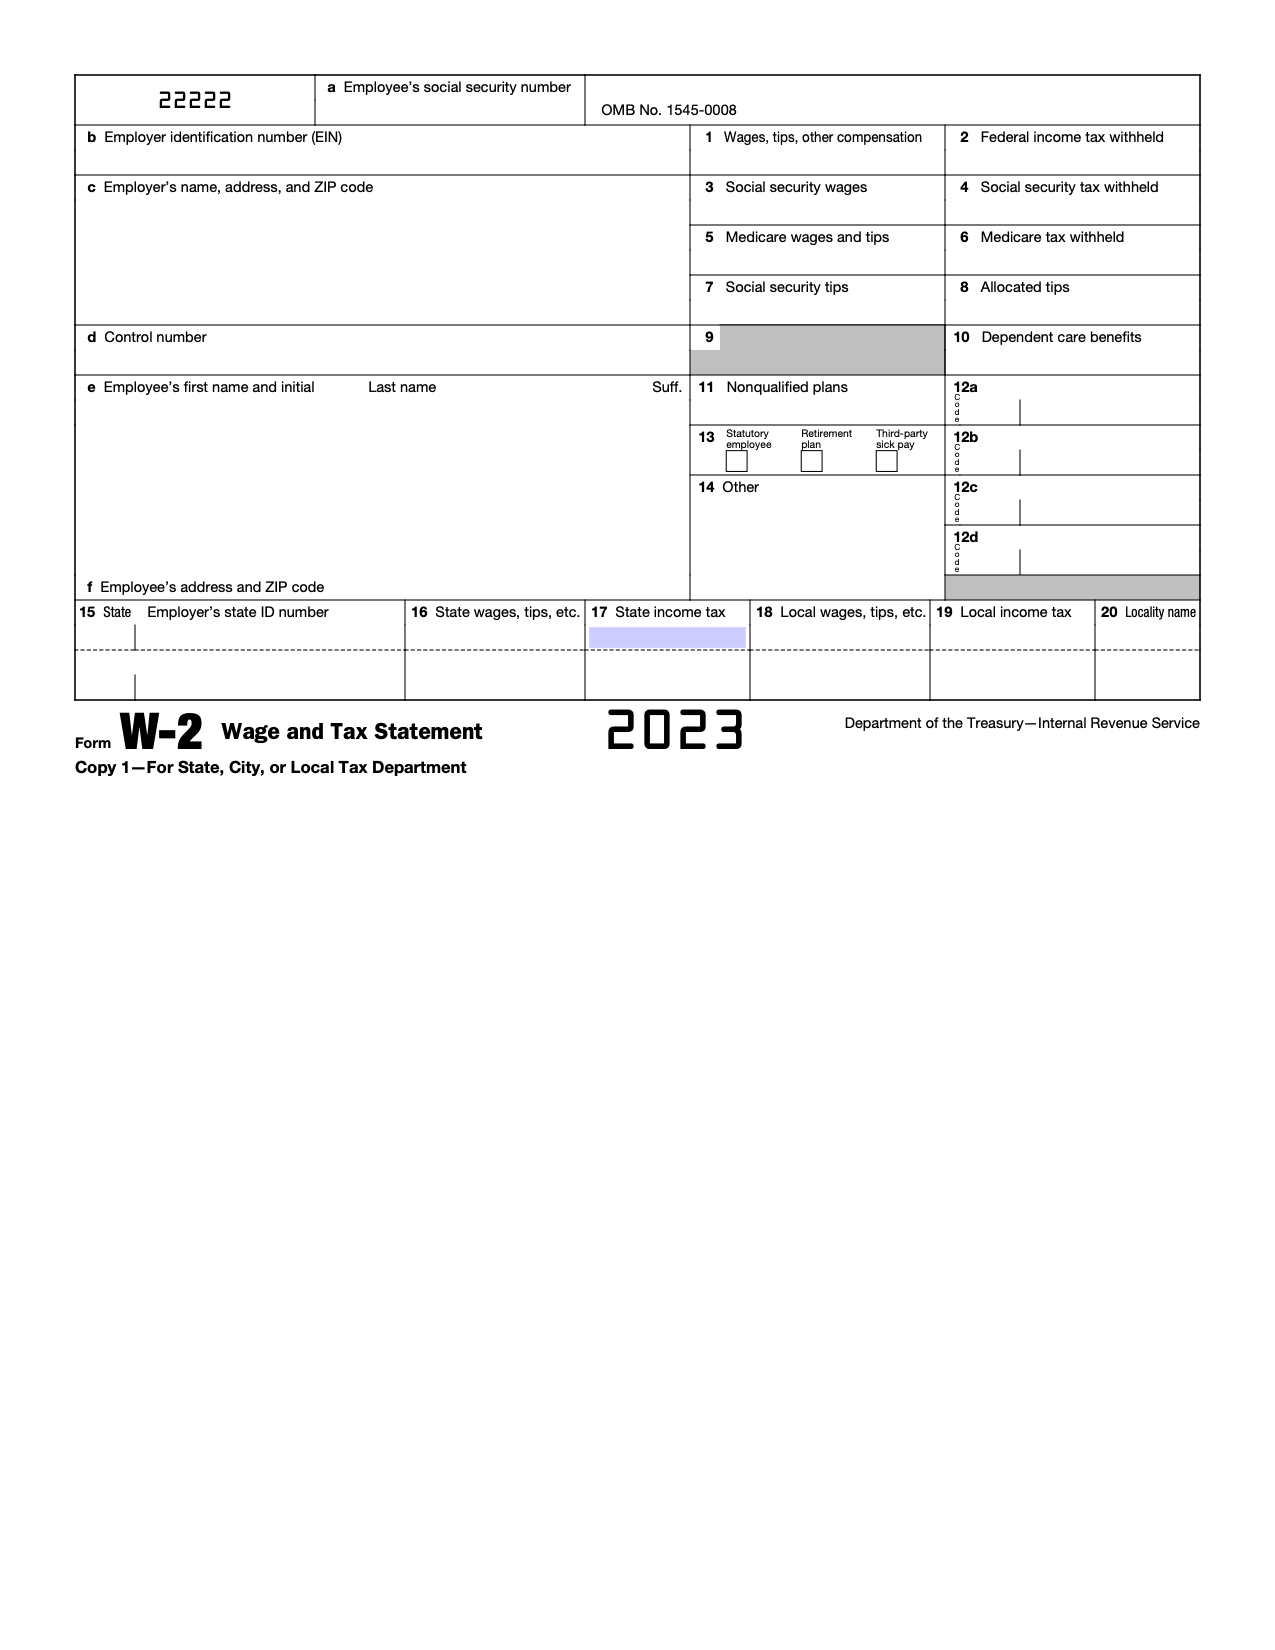 Free Irs Form W-2 | Wage And Tax Statement - Pdf – Eforms intended for Printable 2022 W2 Form